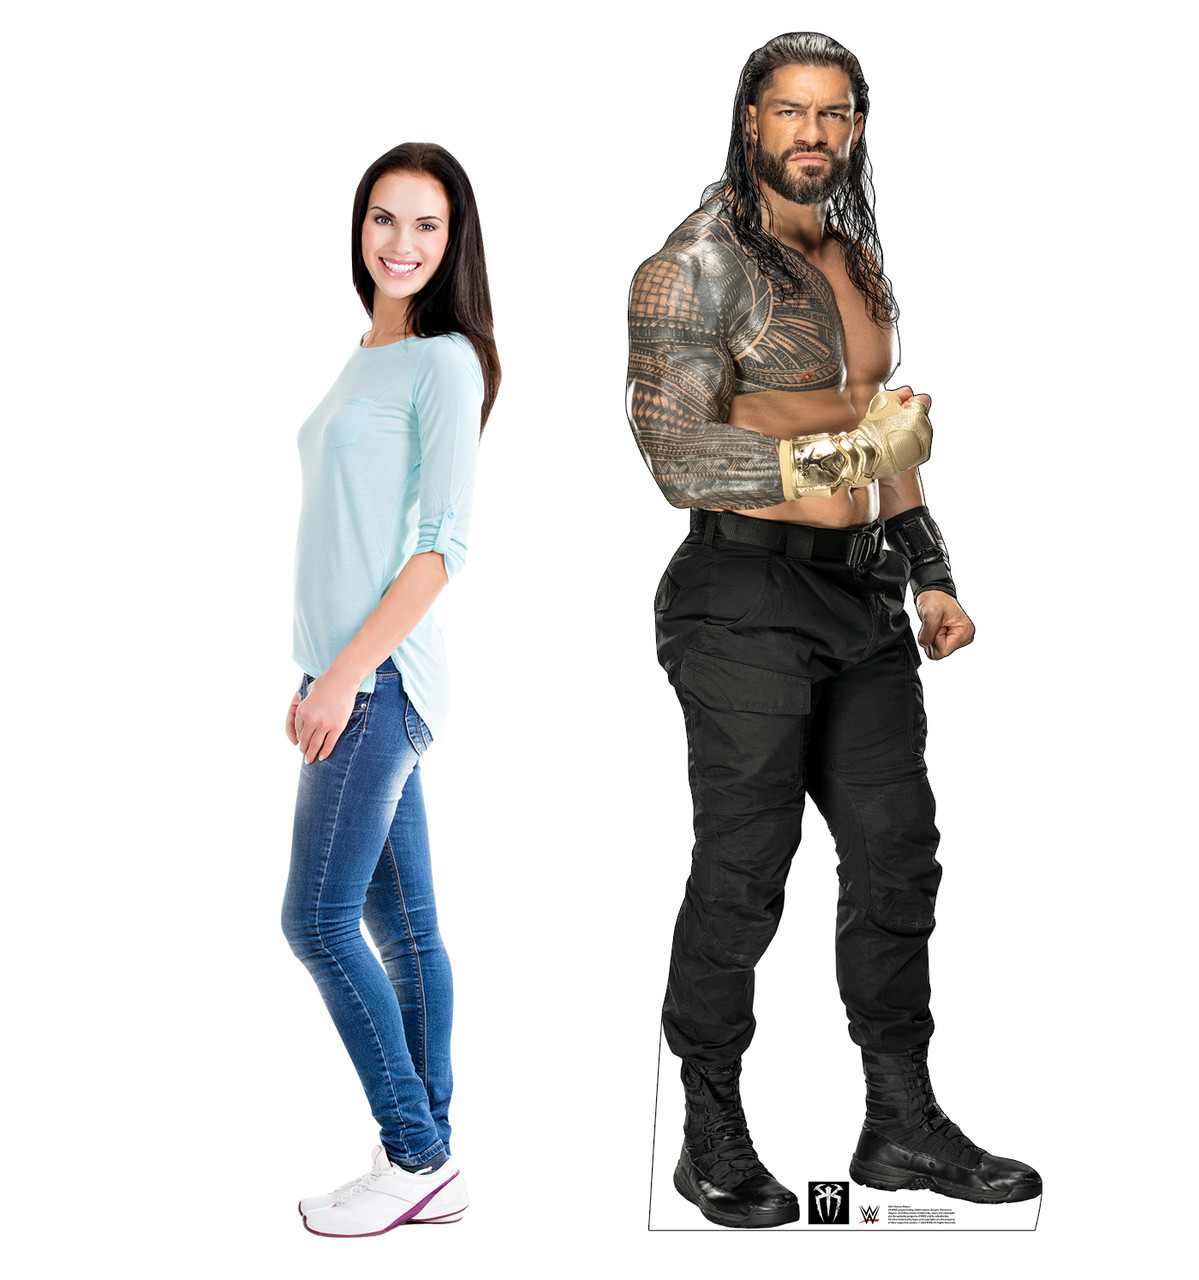 Roman Reigns WWE Life-size cardboard standee with model.